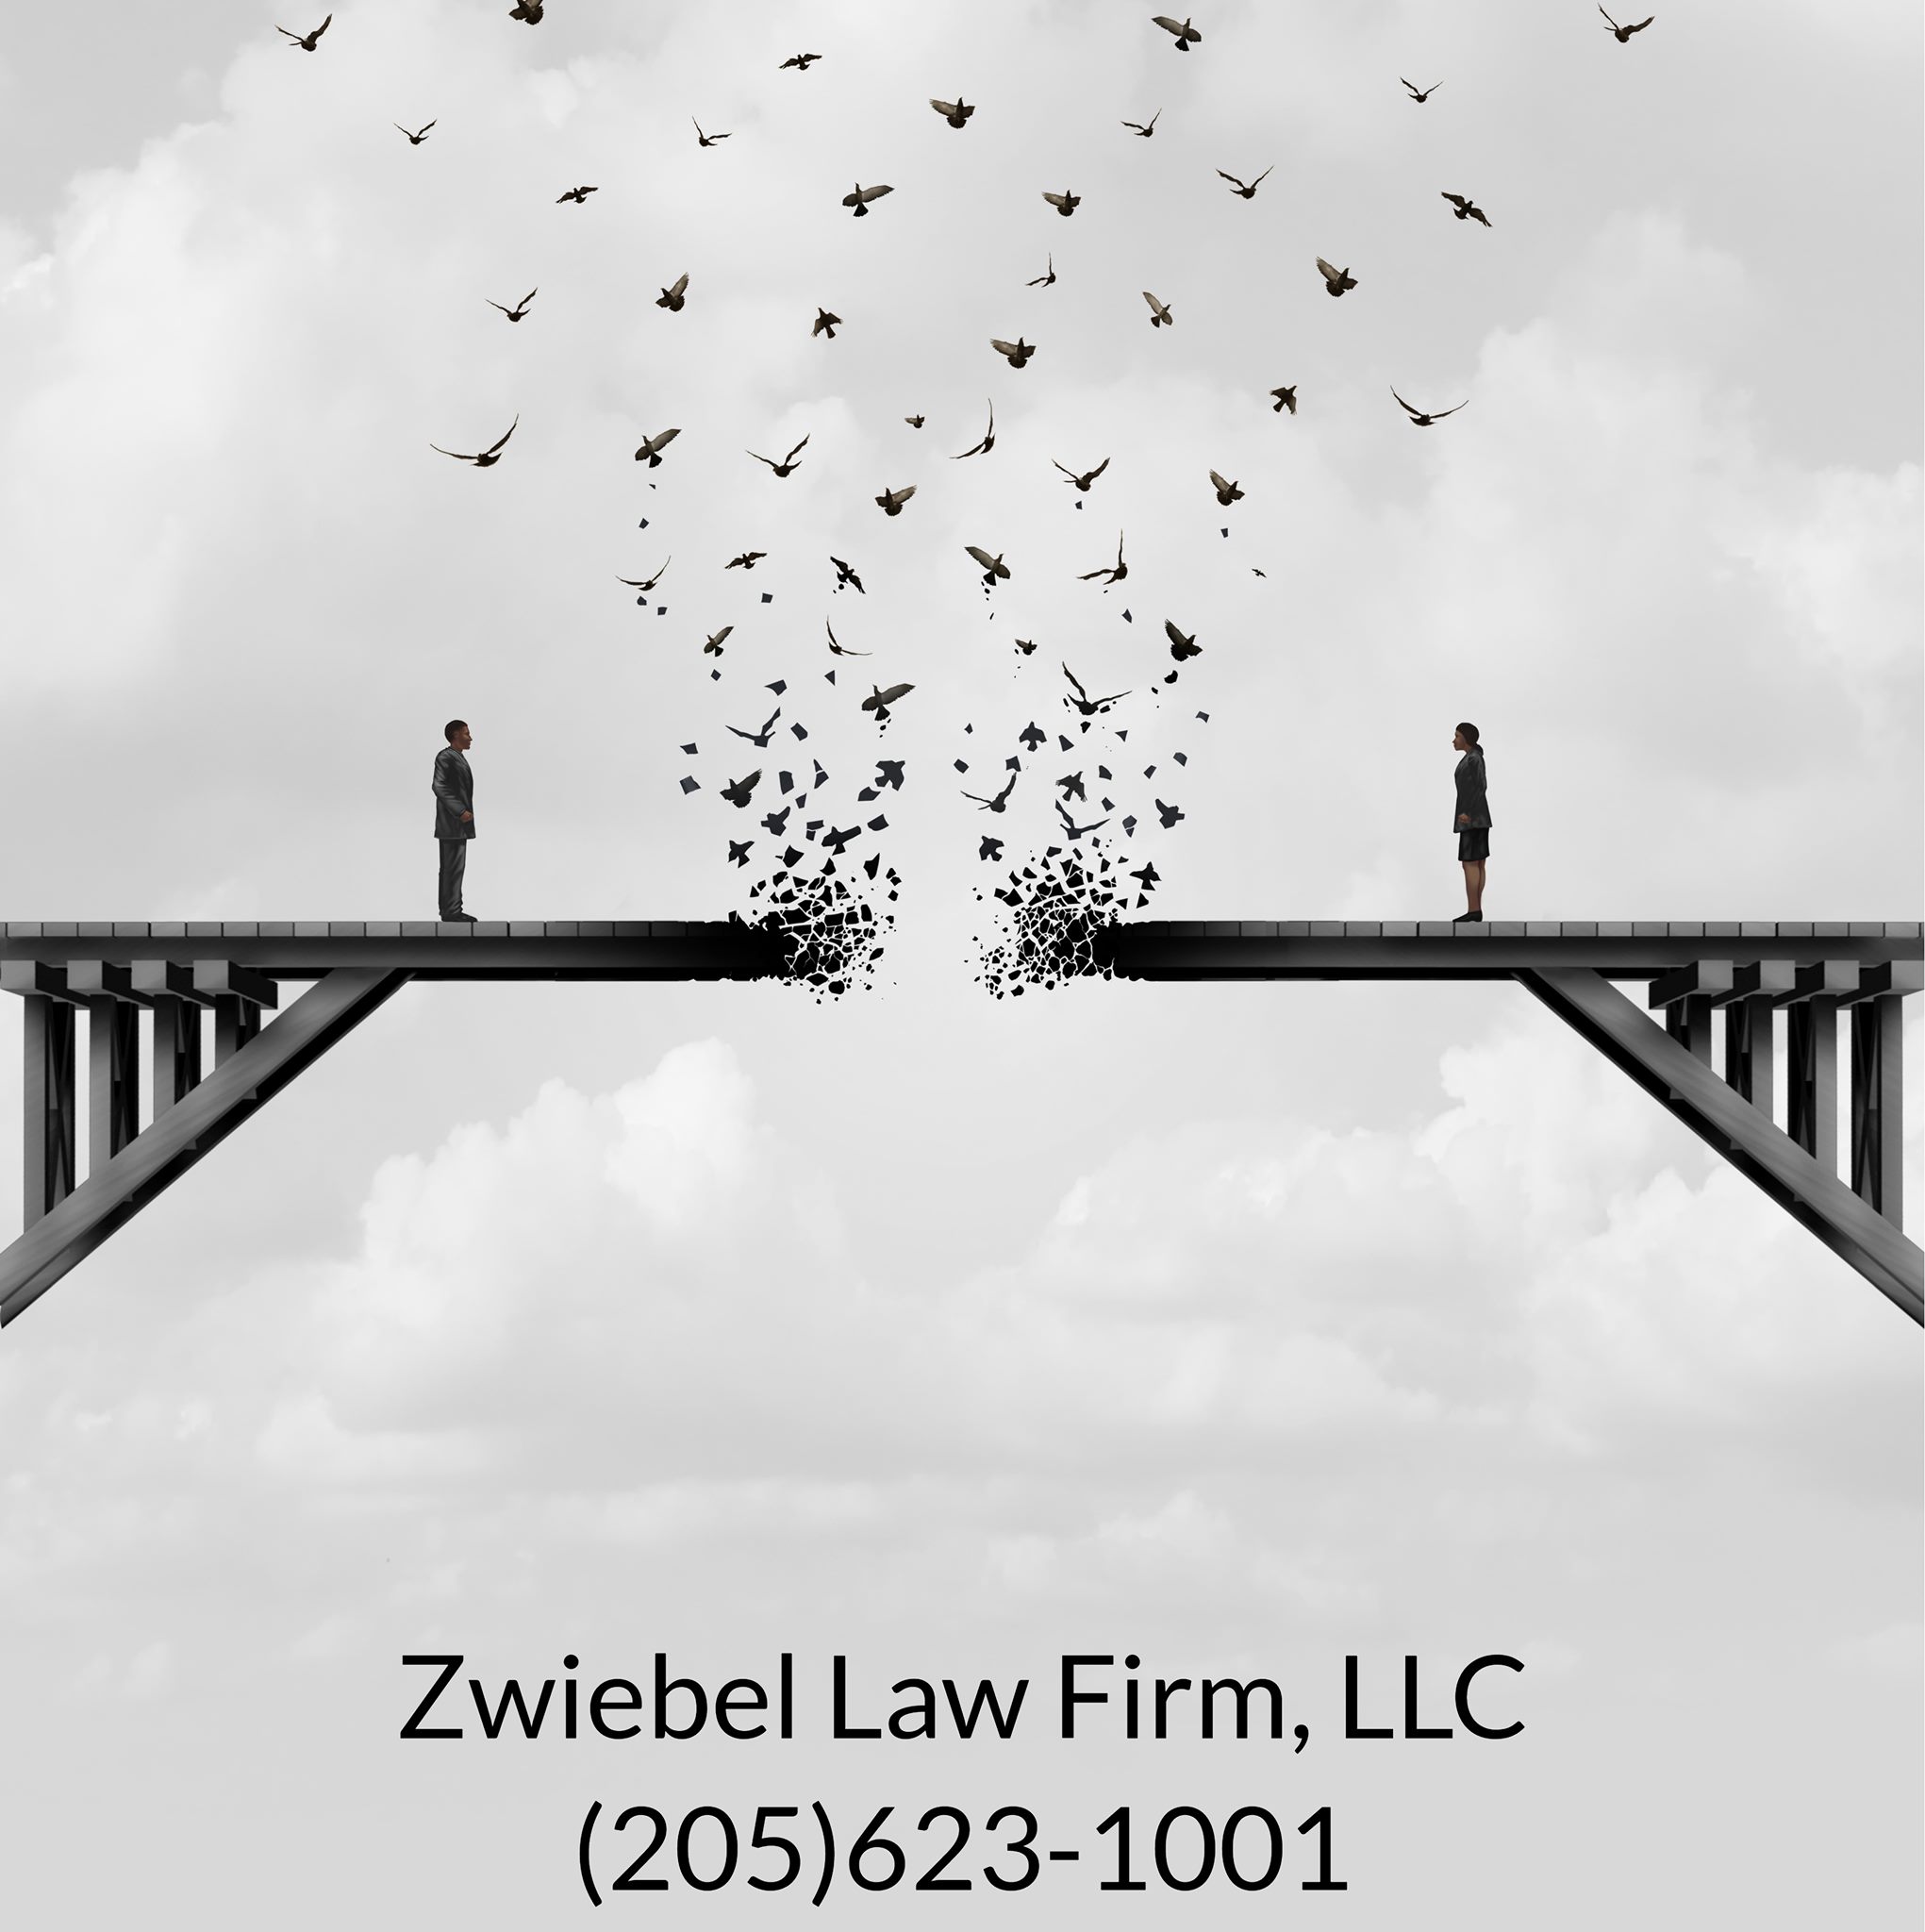 The Zwiebel Law Firm